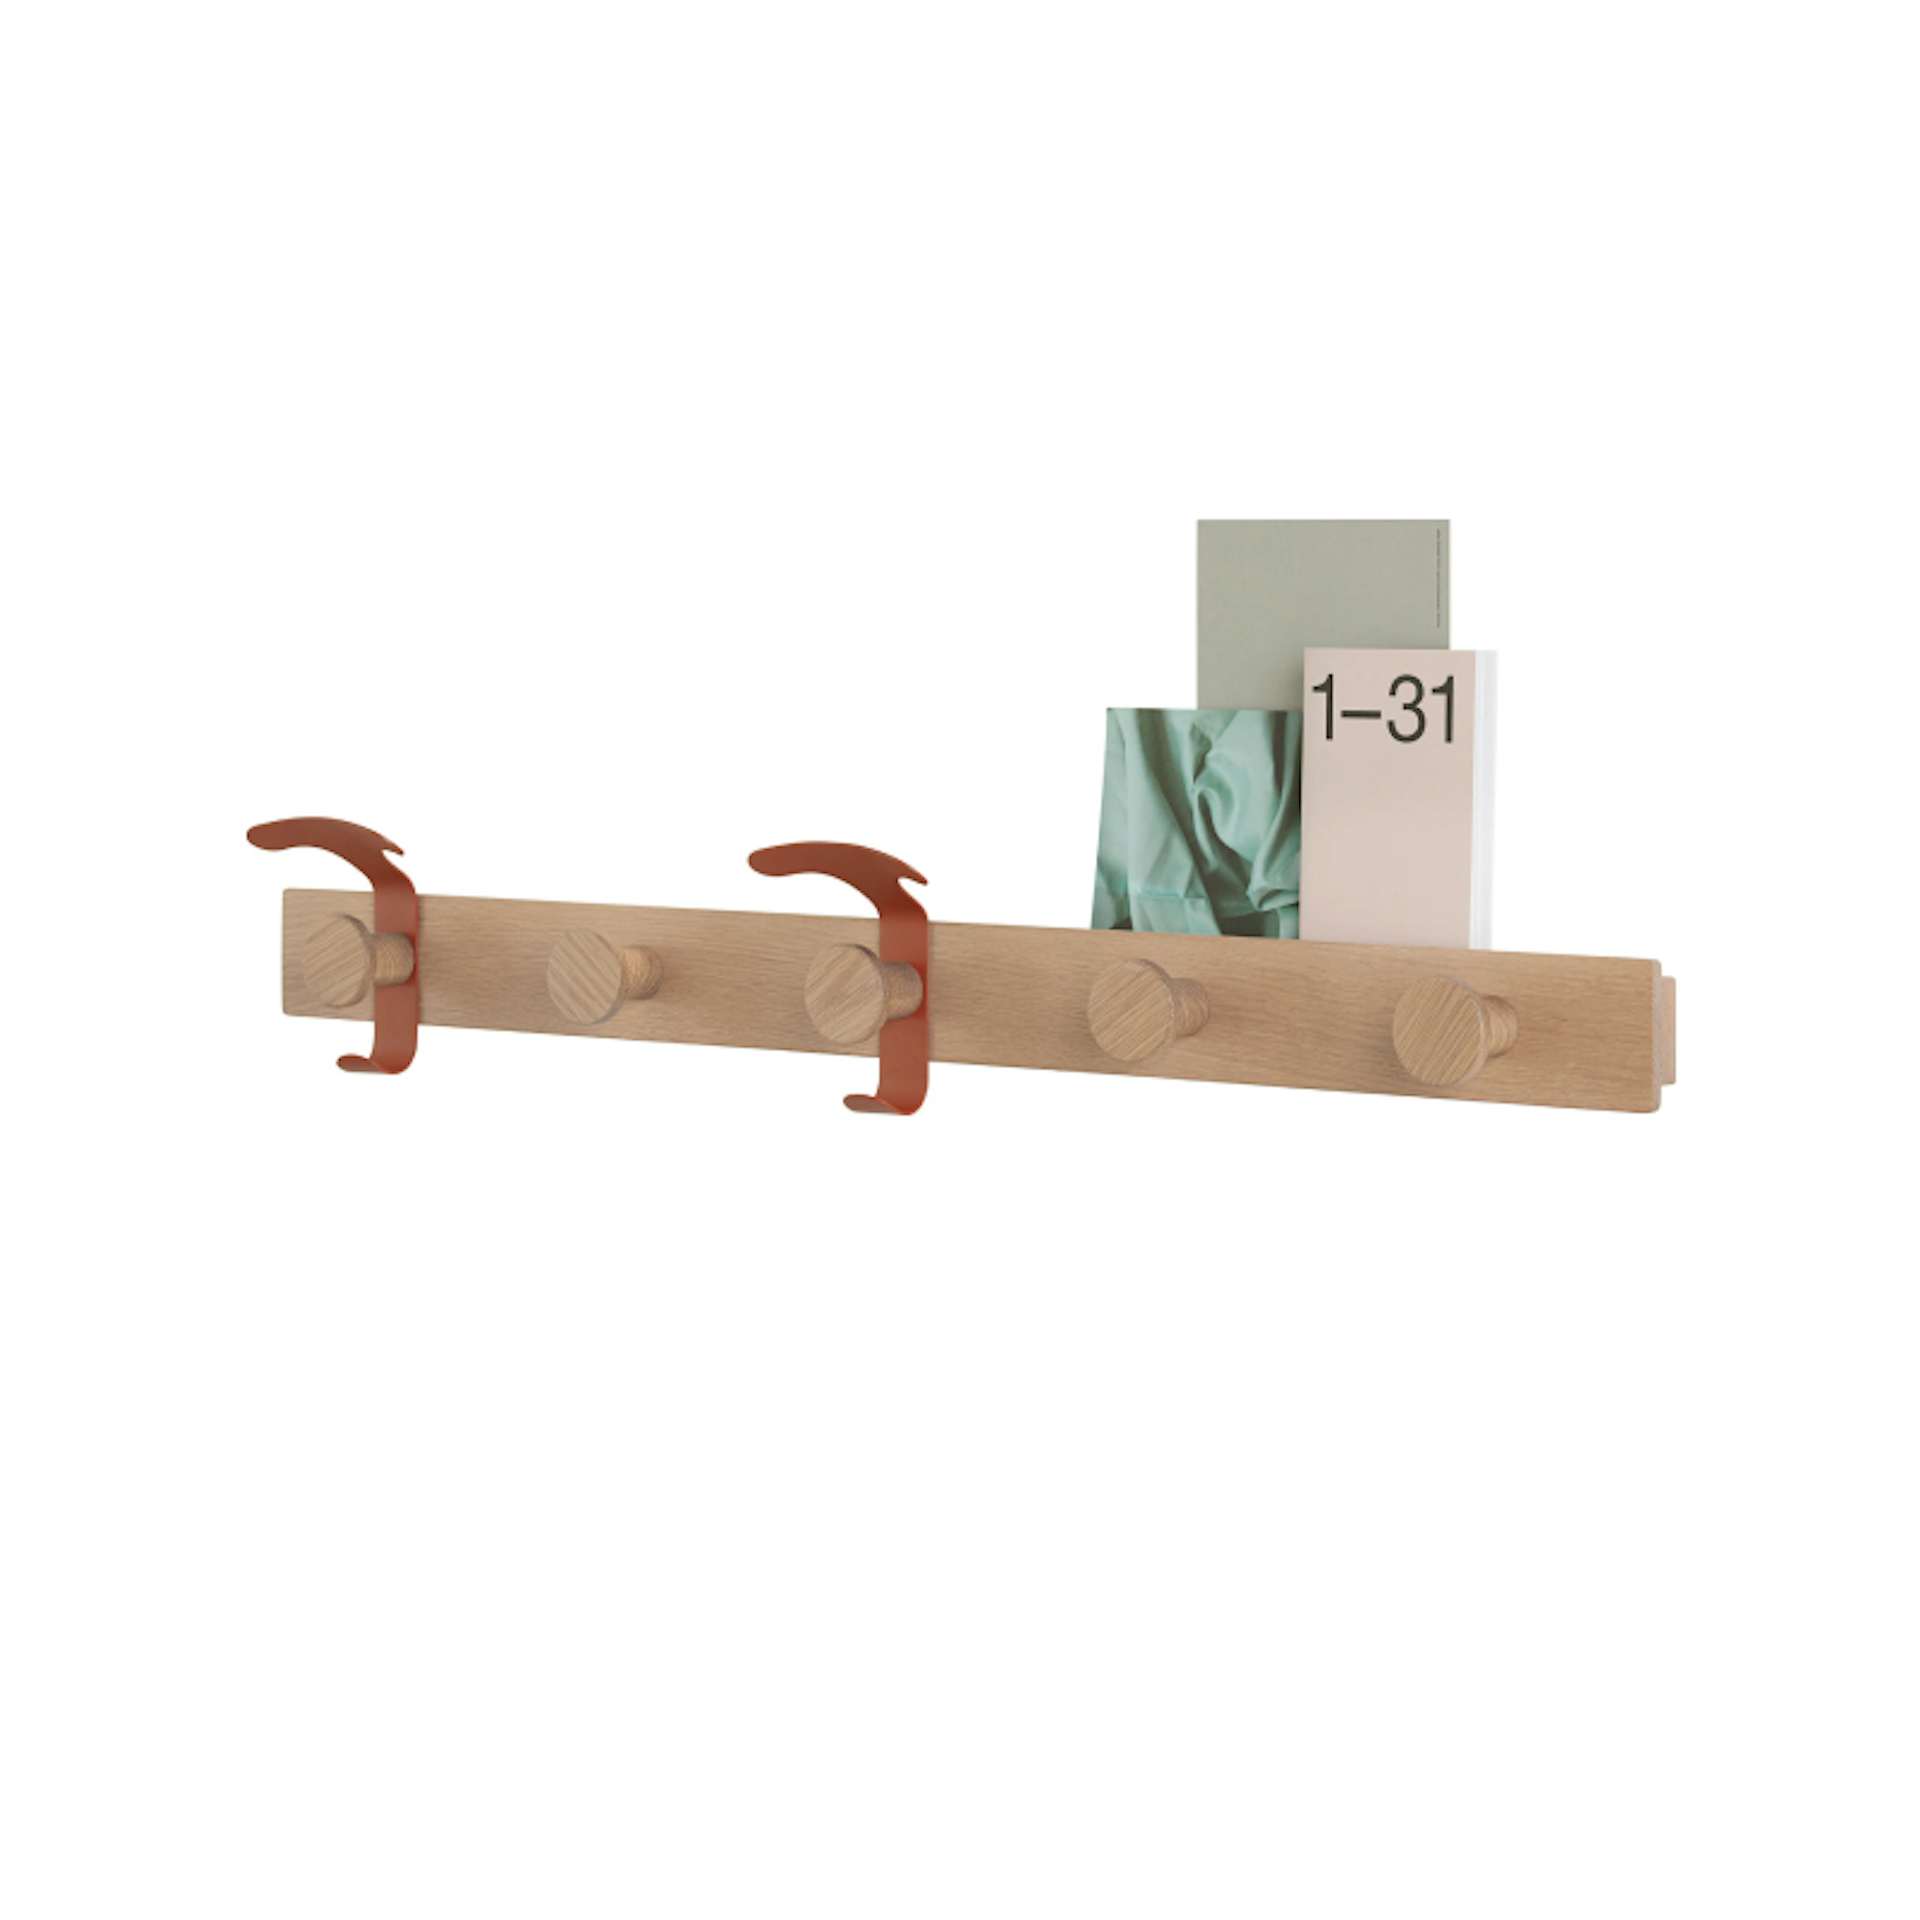 Discover the best beat-coat-rack.html products on Dwell - Dwell